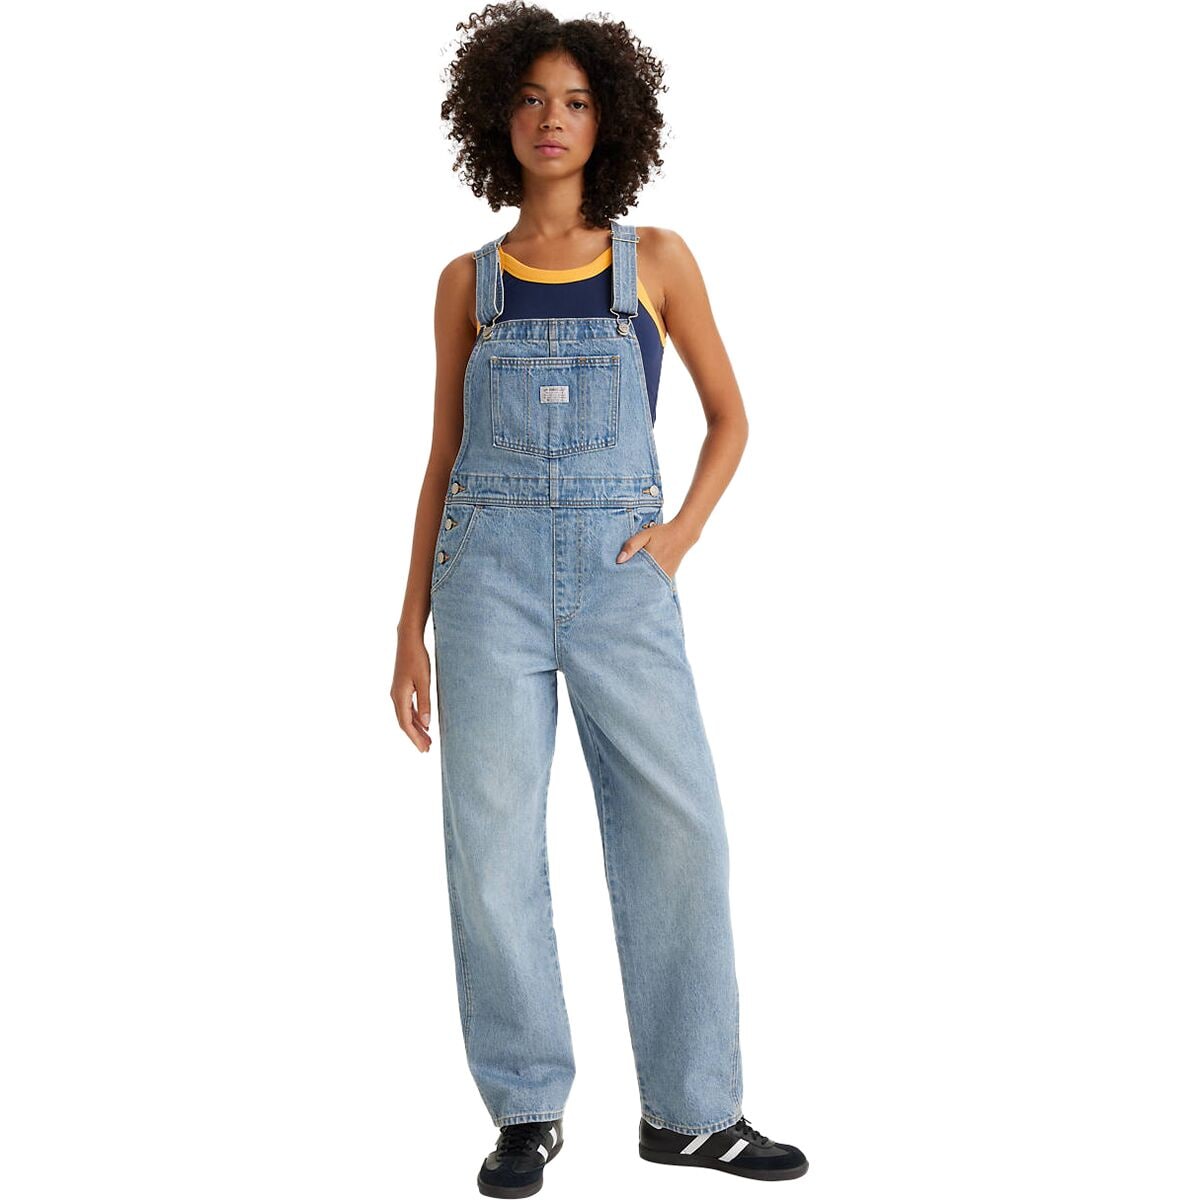 Levi's Vintage Overall - Women's - Clothing